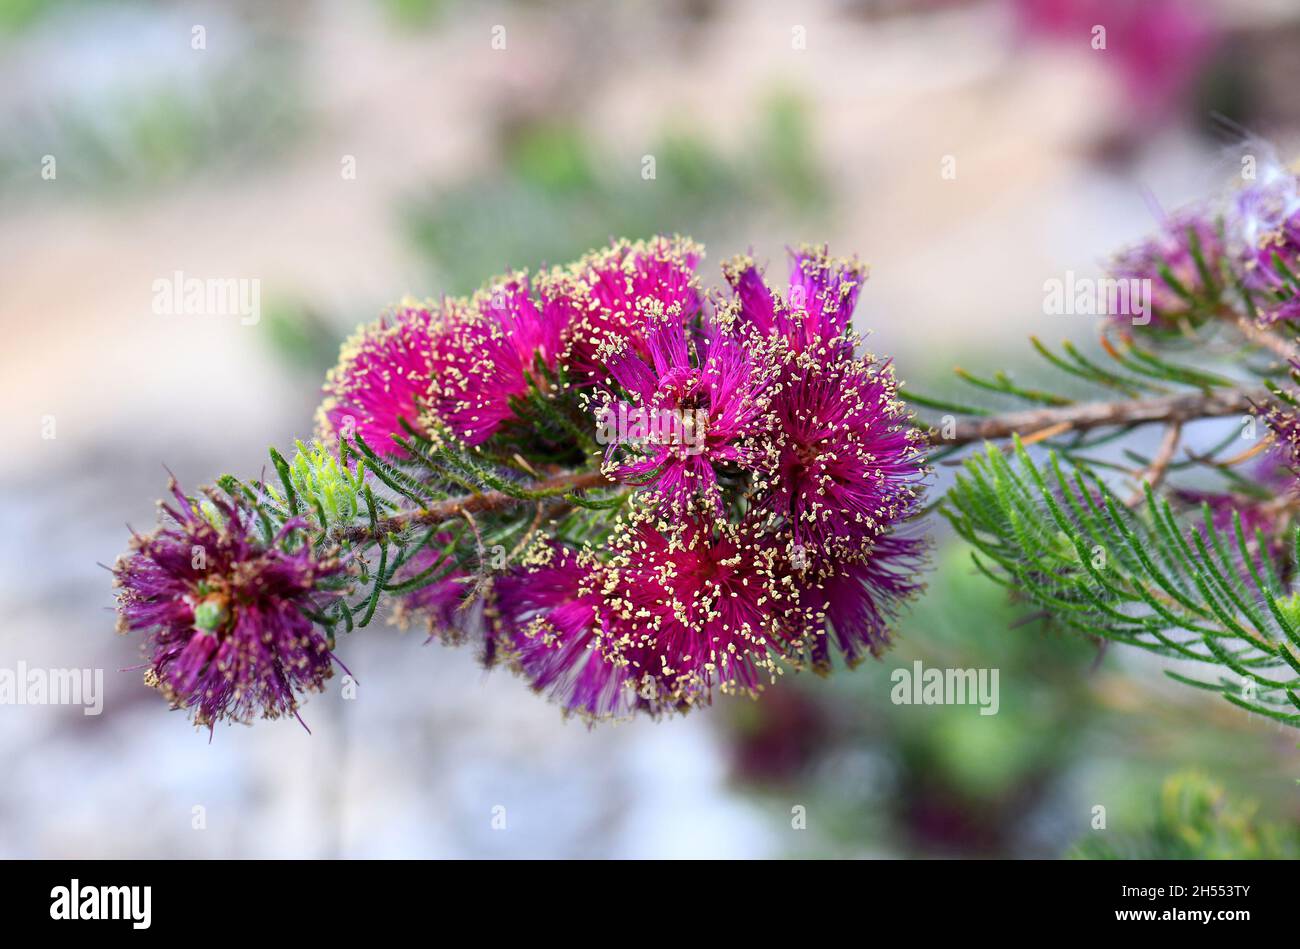 Yellow anthers and vibrant deep pink purple flowers of the Australian native Pretty Honey Myrtle, Melaleuca trichophylla, family Myrtaceae. Stock Photo